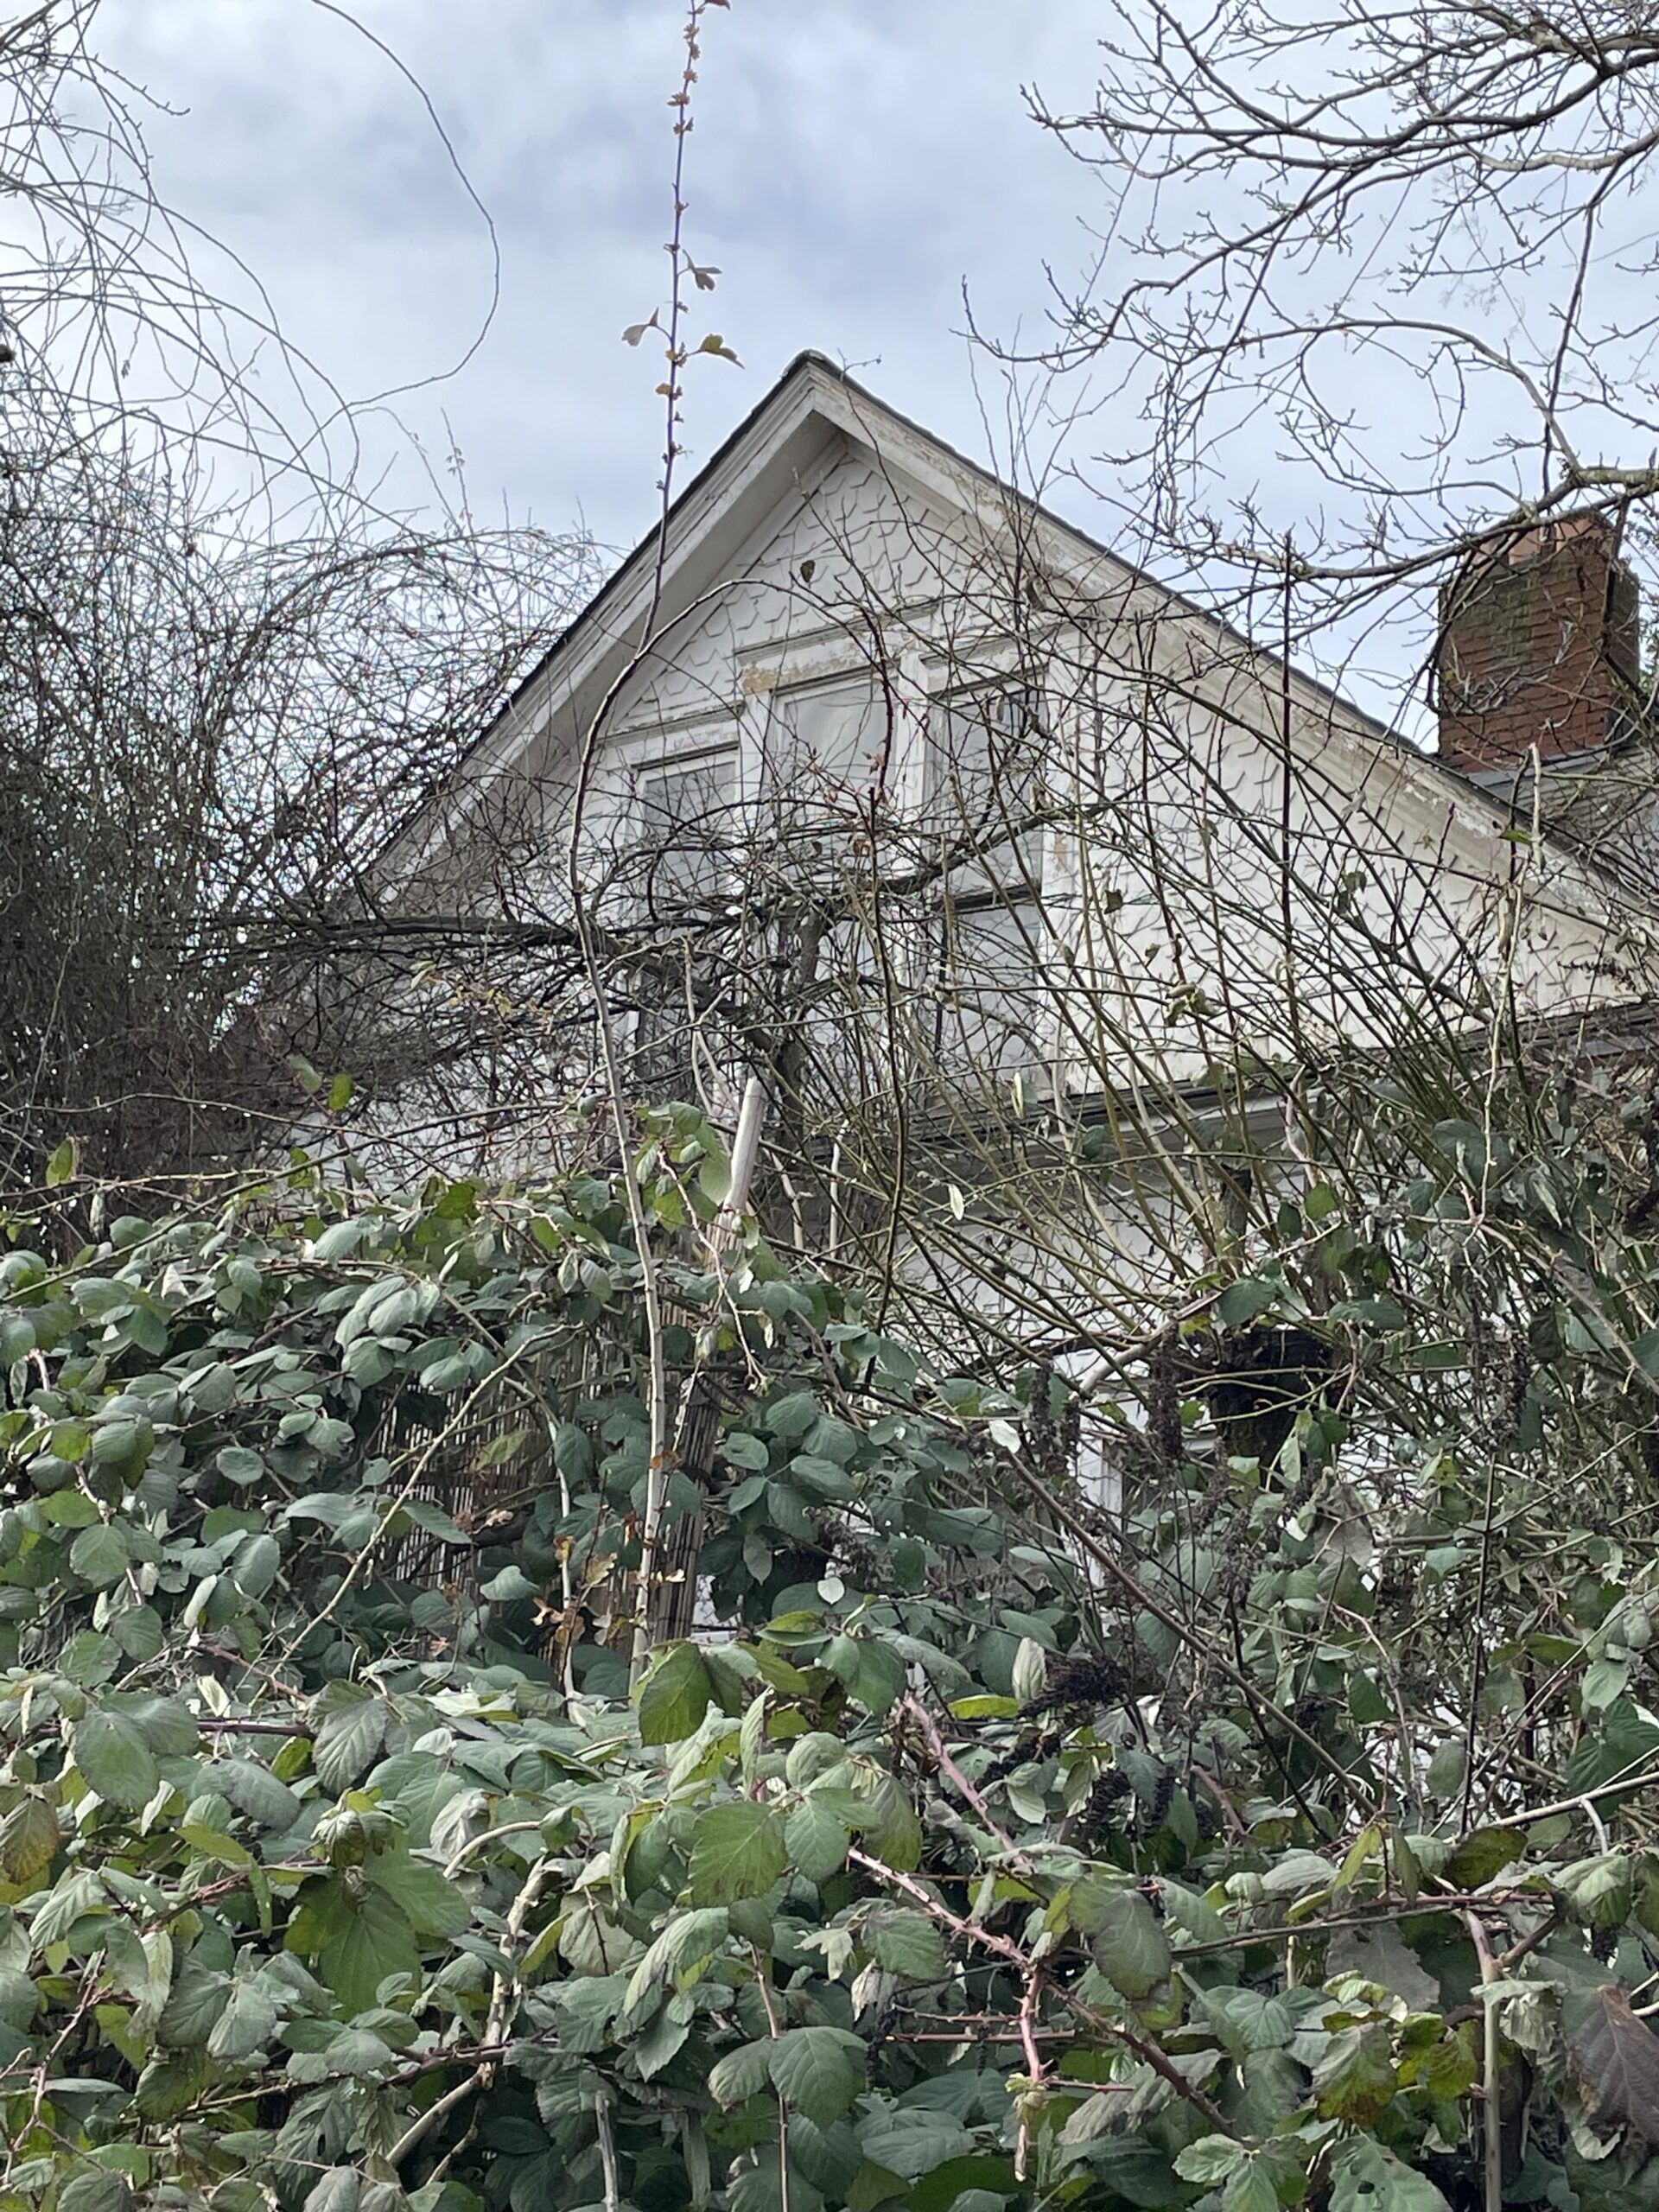 An old, grand house almost invisible behind overgrown branches and brambles.